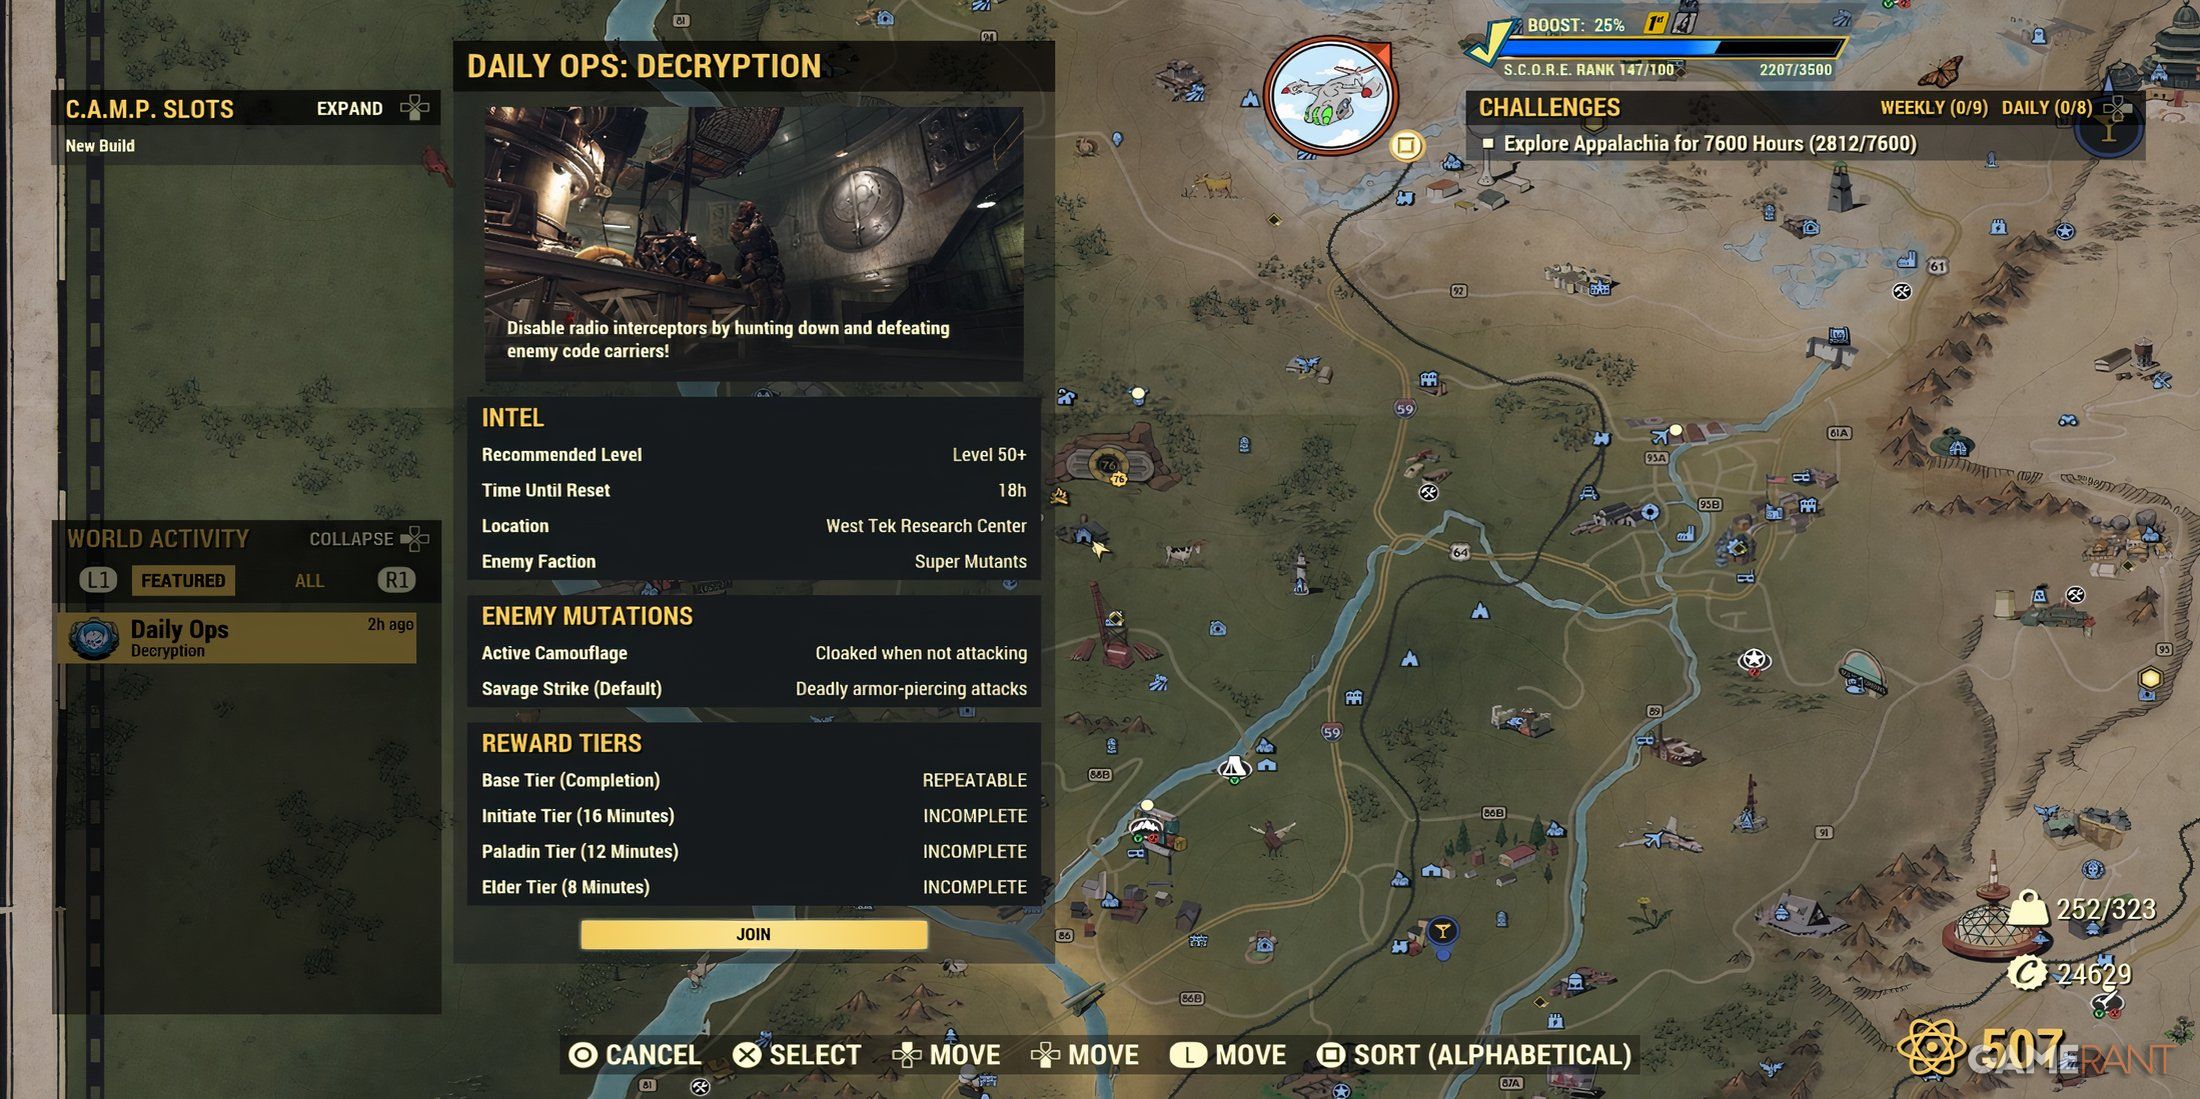 Decryption Daily Op Menu in Fallout 76